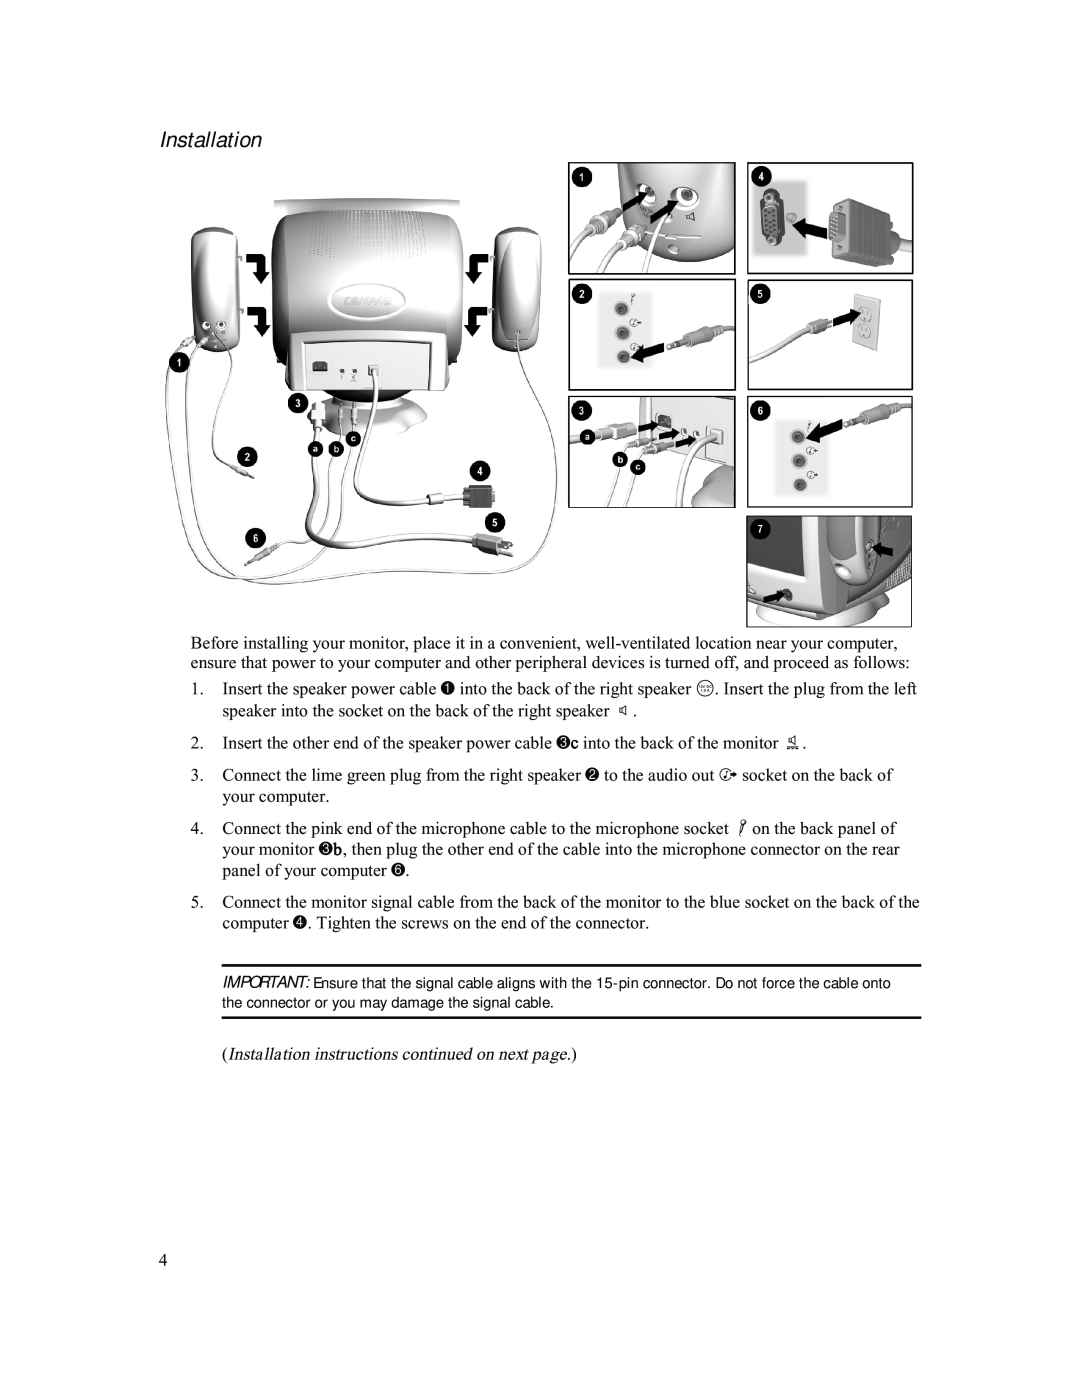 Compaq 740 manual Installation instructions continued on next page 